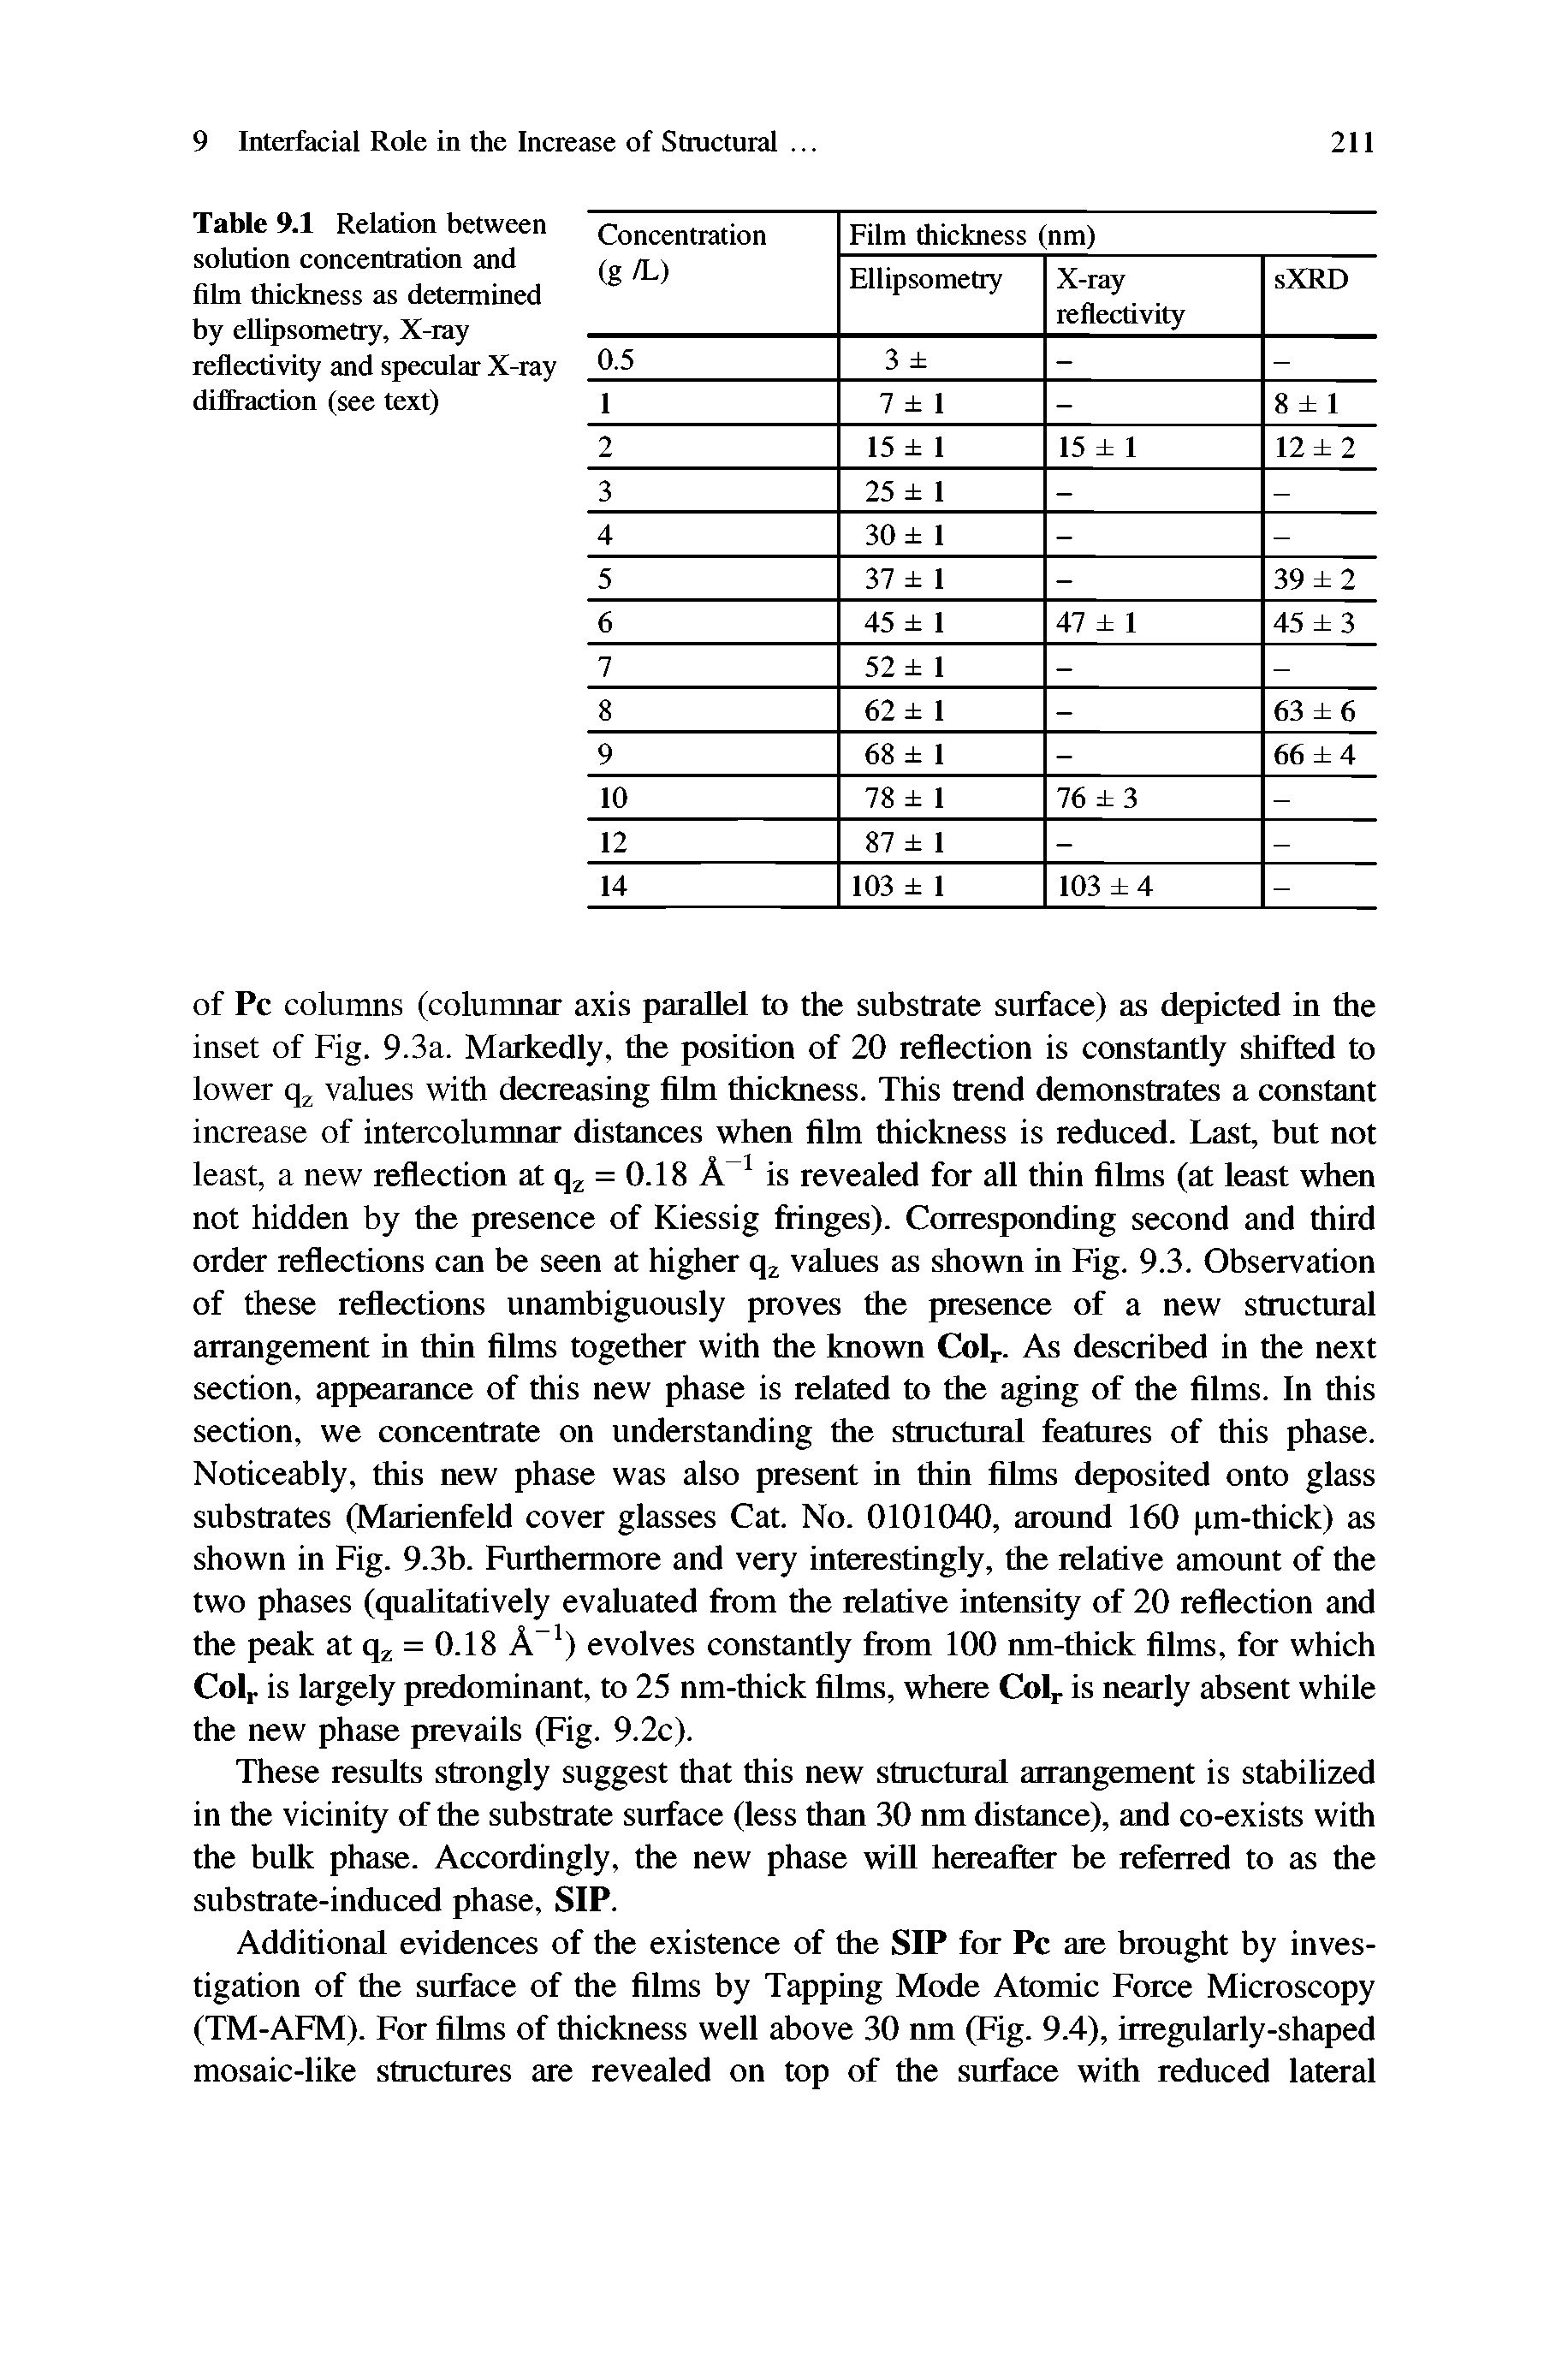 Table 9.1 Relation between solution concentration and film thickness as determined by ellipsometry, X-ray reflectivity and specular X-ray diffraction (see text)...